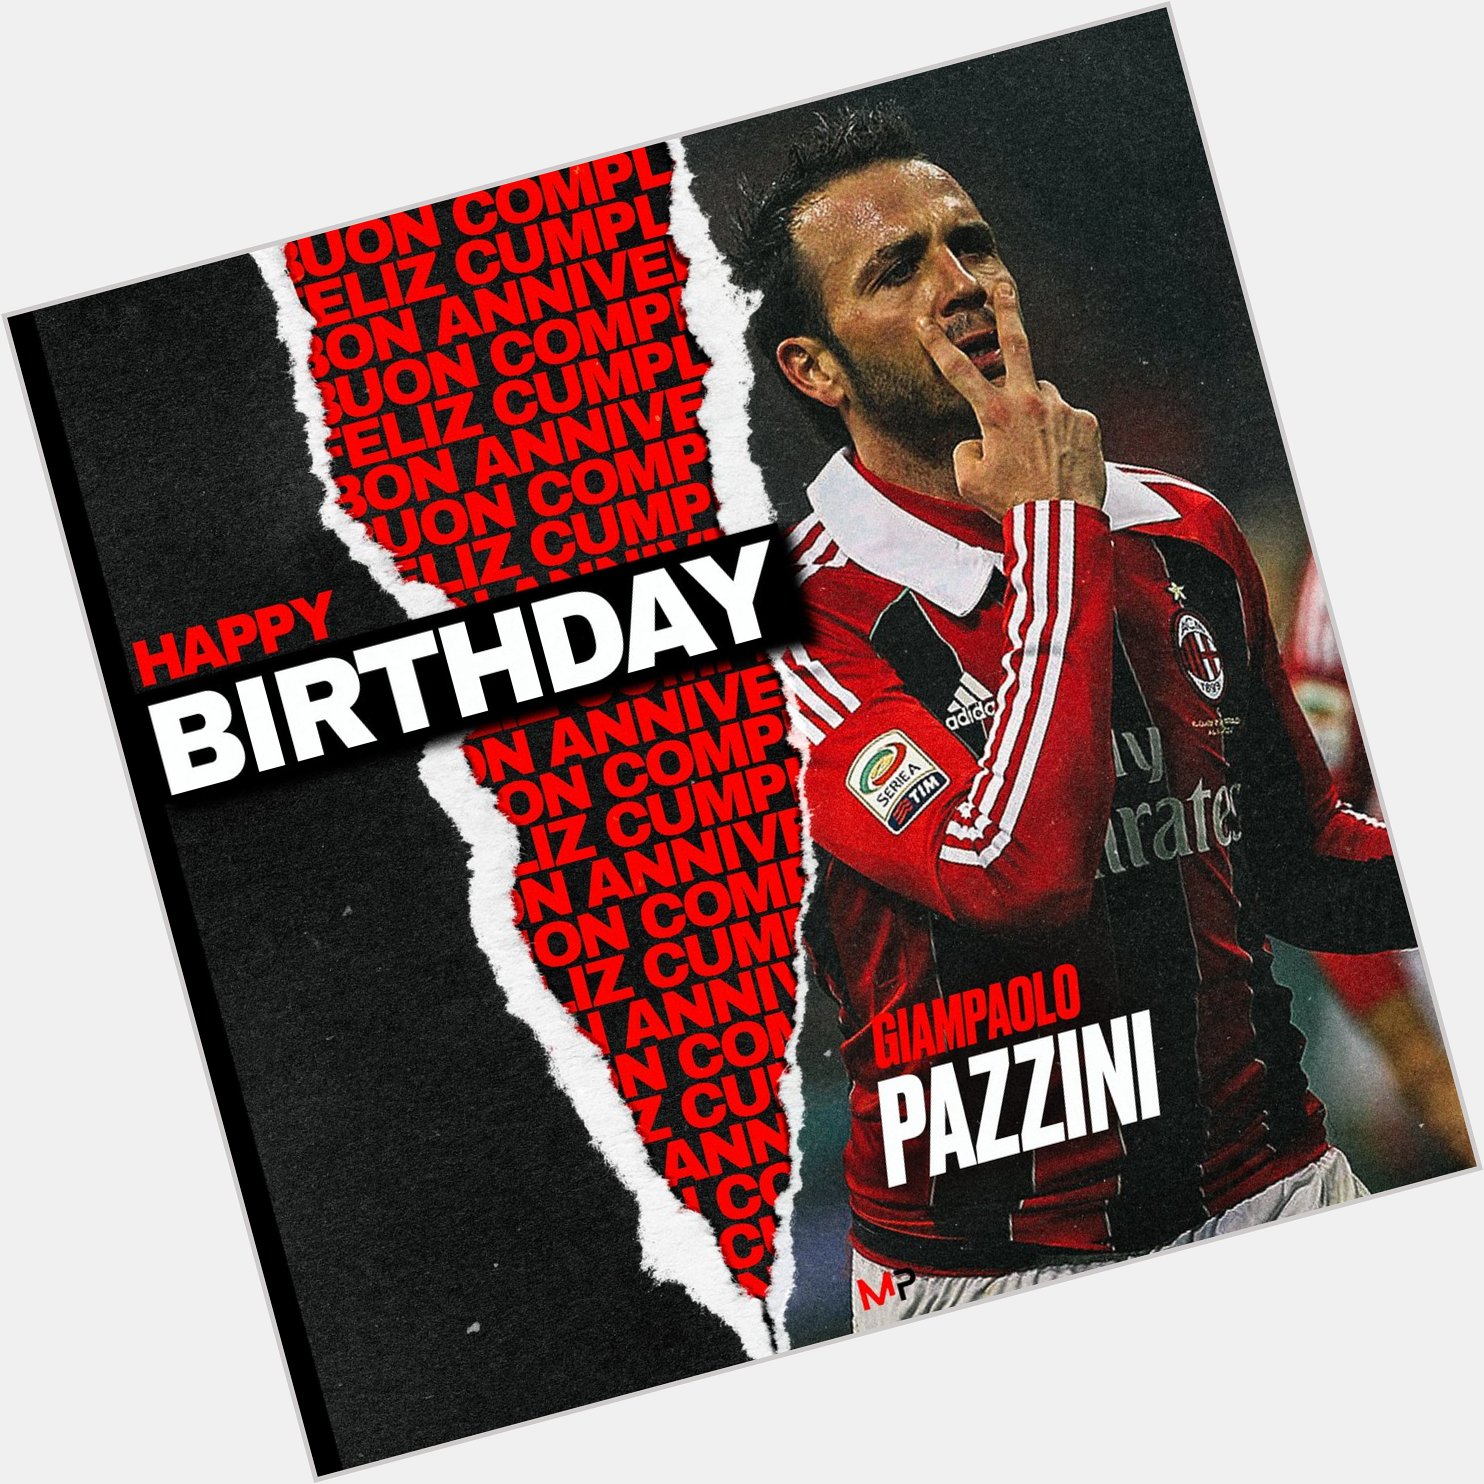  Happy Birthday Giampaolo Pazzini    86 Appareances  24 Goals 04 Assists 